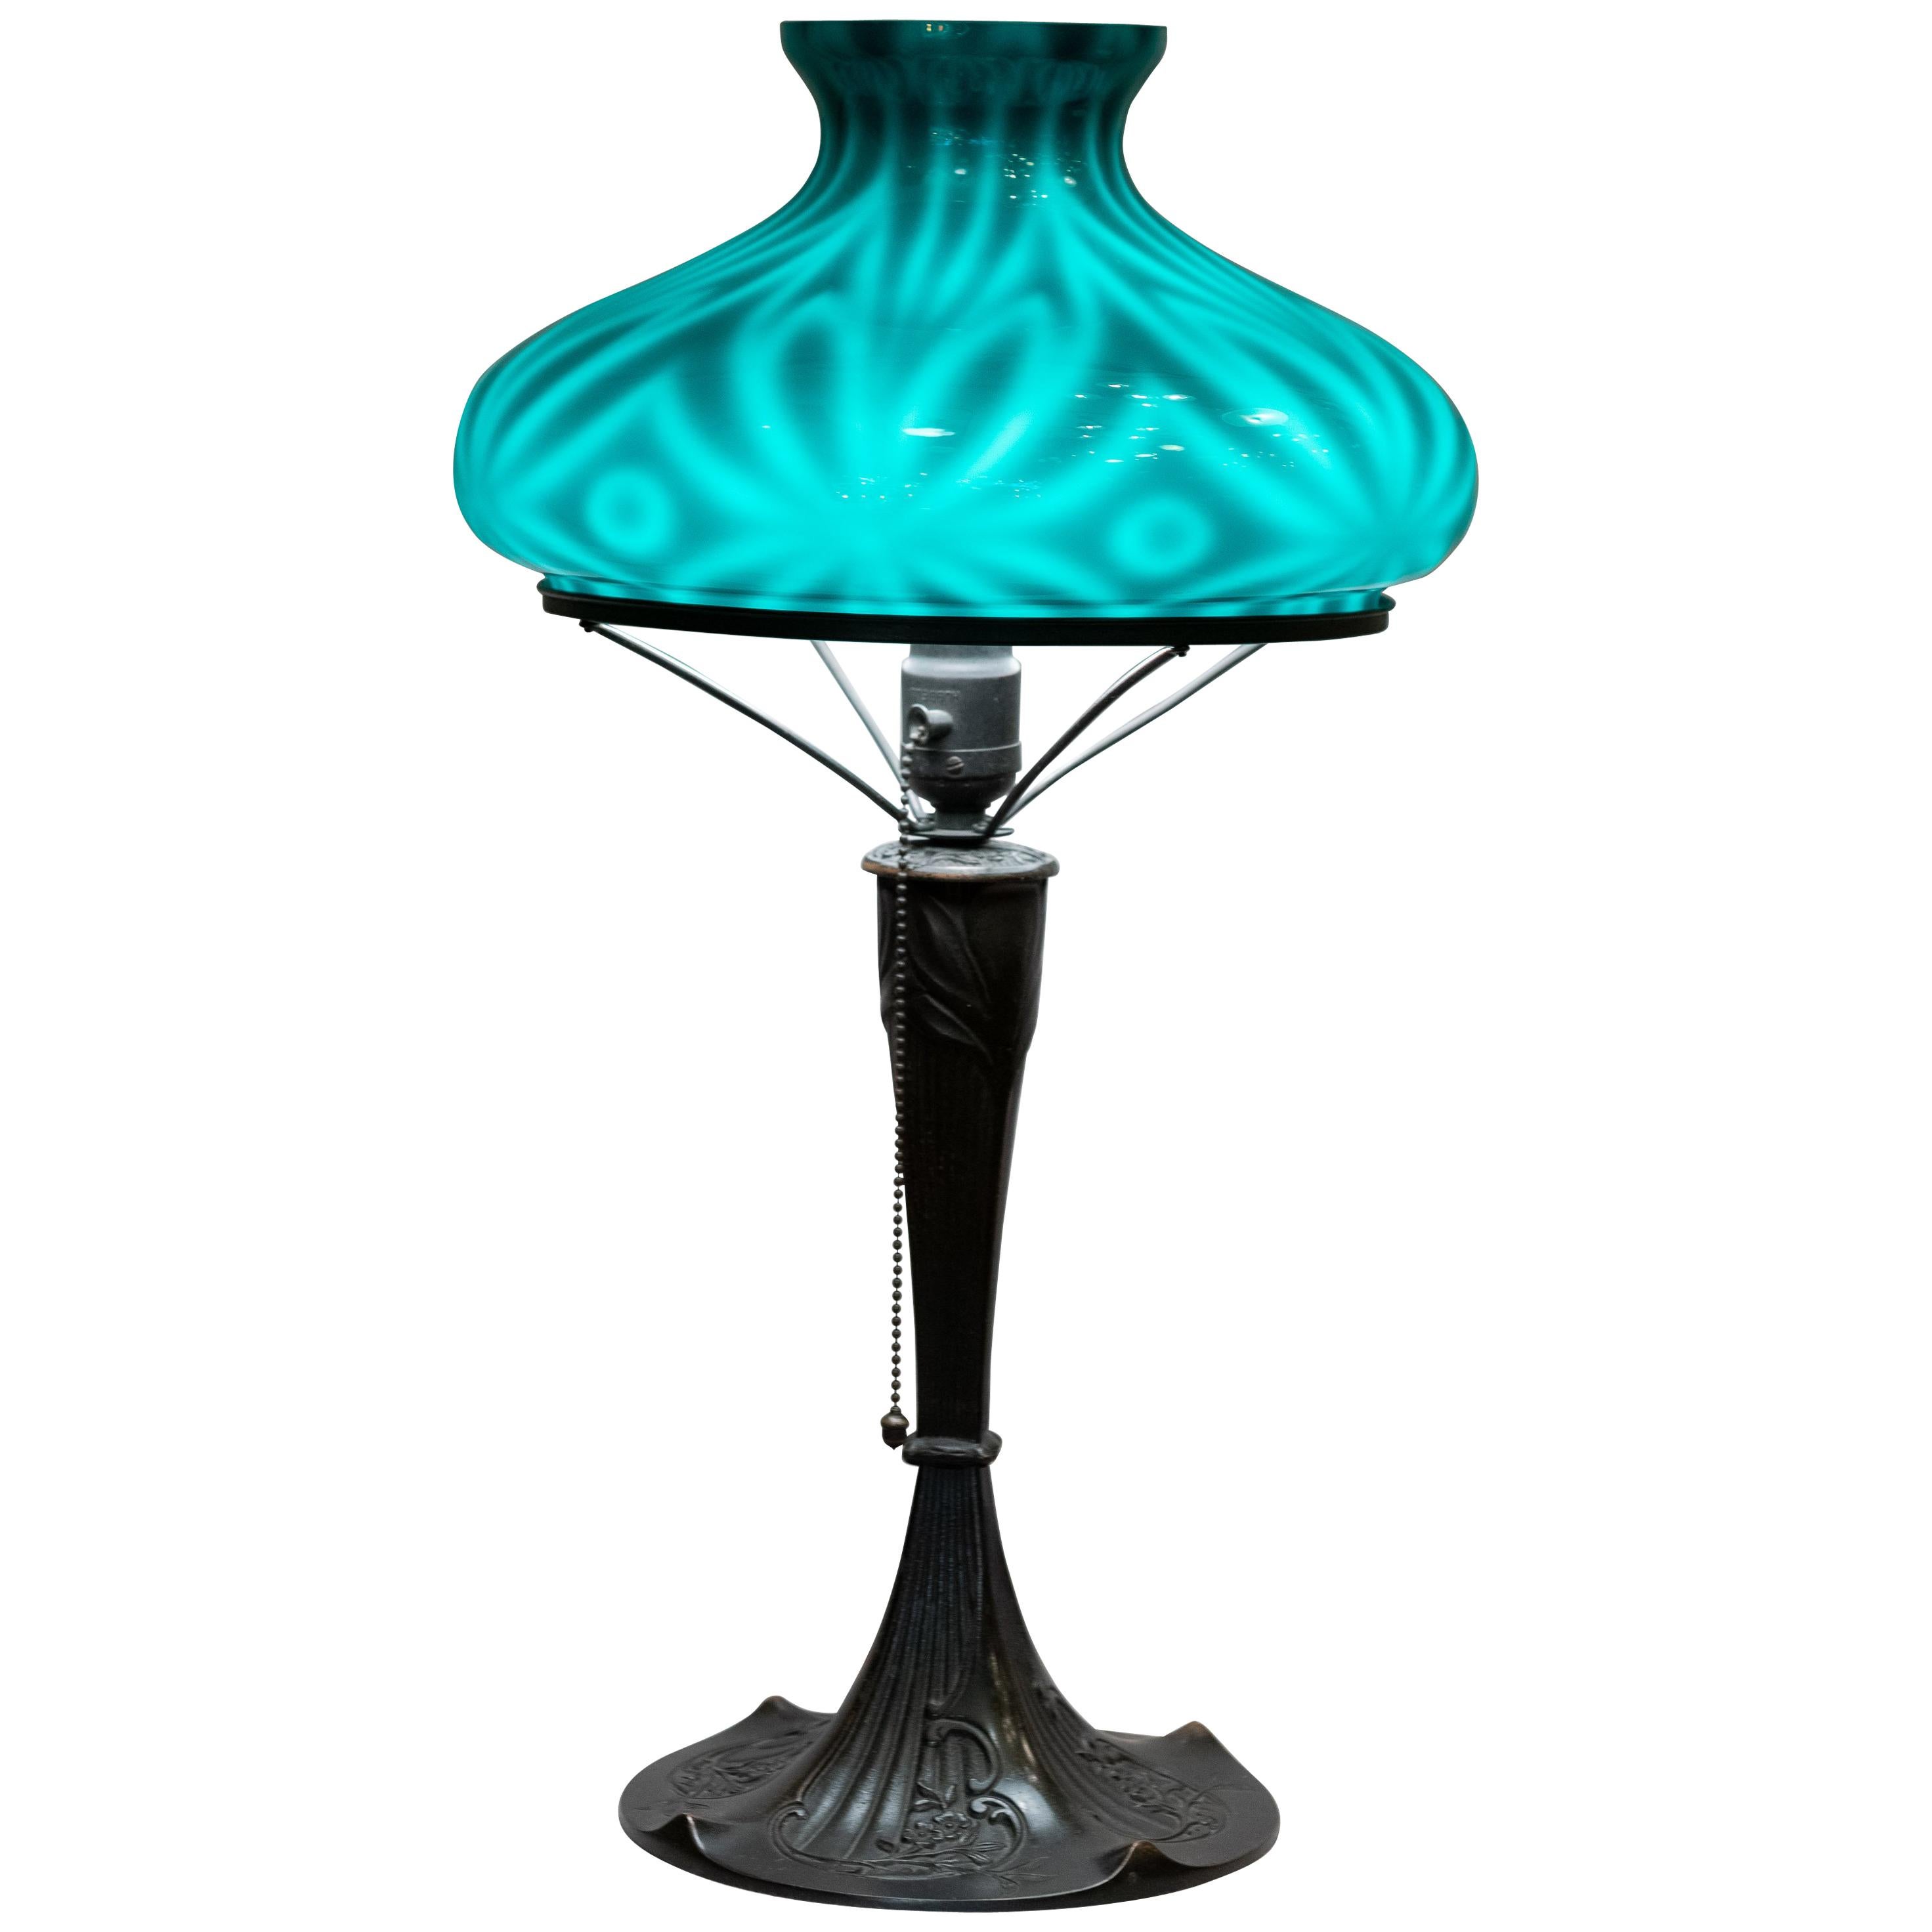 Art Nouveau Table Lamp with Spider Shade by Emeralite